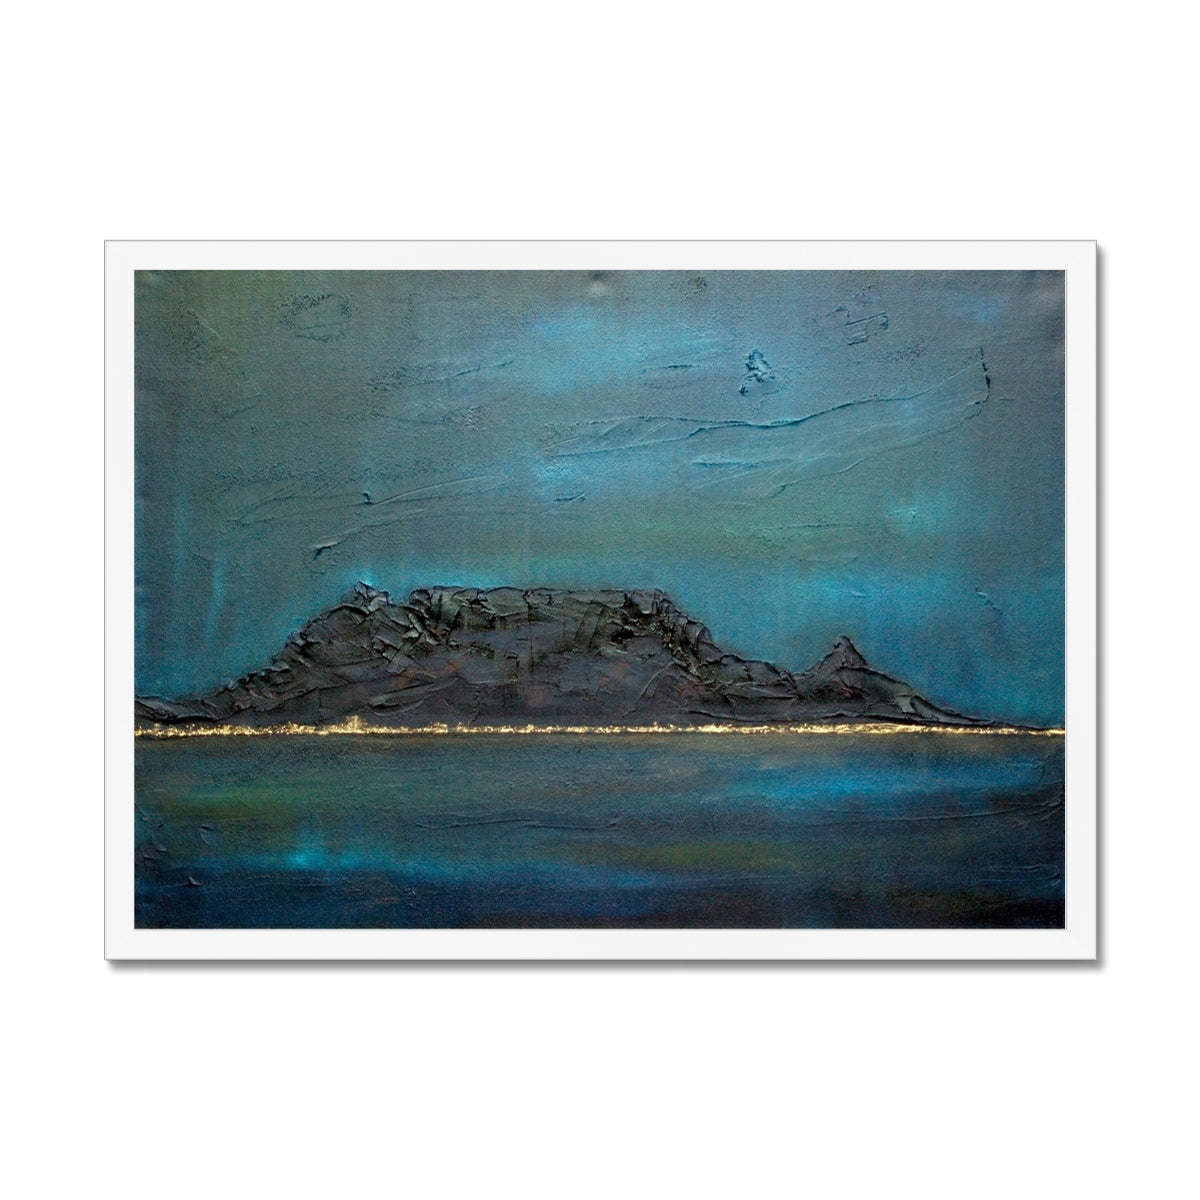 Table Mountain Dusk Painting | Framed Prints From Scotland-Framed Prints-World Art Gallery-A2 Landscape-White Frame-Paintings, Prints, Homeware, Art Gifts From Scotland By Scottish Artist Kevin Hunter